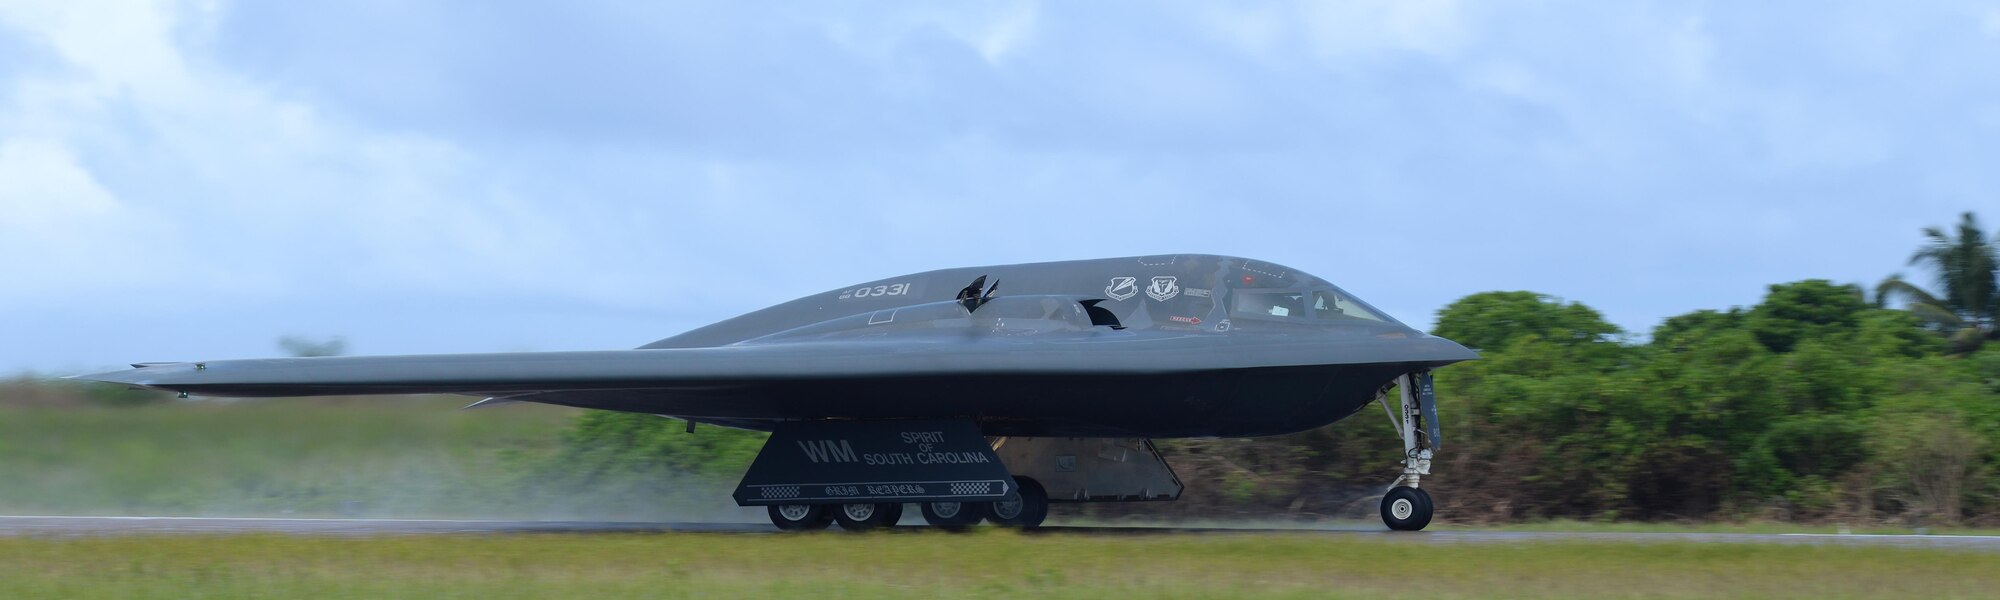 A B-2 Spirit from Whiteman Air Force Base, Mo., takes off from an undisclosed location in the U.S. Pacific Command area of operations March 10, 2016. Bomber crews routinely deploy to maintain a high state of readiness and crew proficiency while integrating capabilities with key regional partners. (U.S. Air Force photo by Senior Airman Joel Pfiester/Released